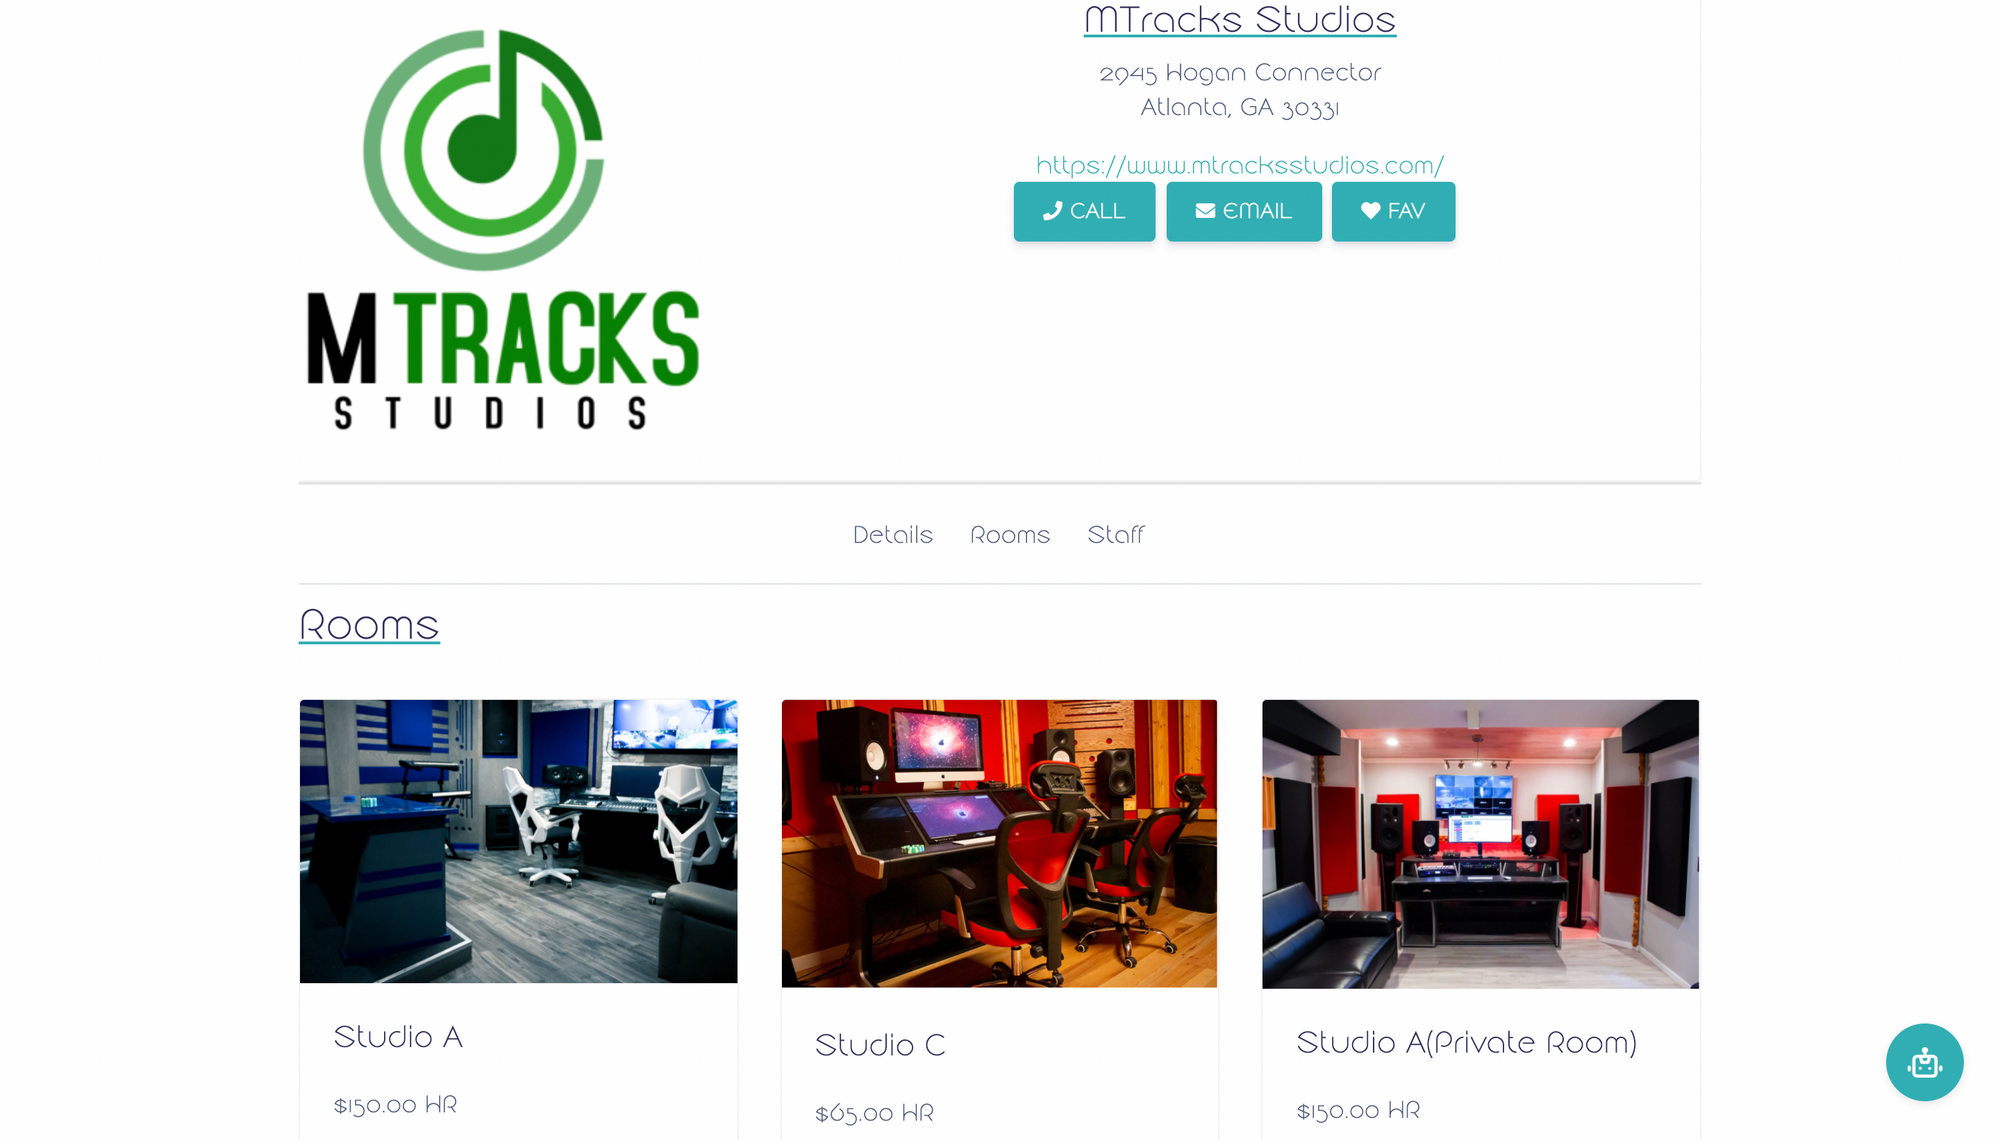 What Can Recording Studios Do For You?